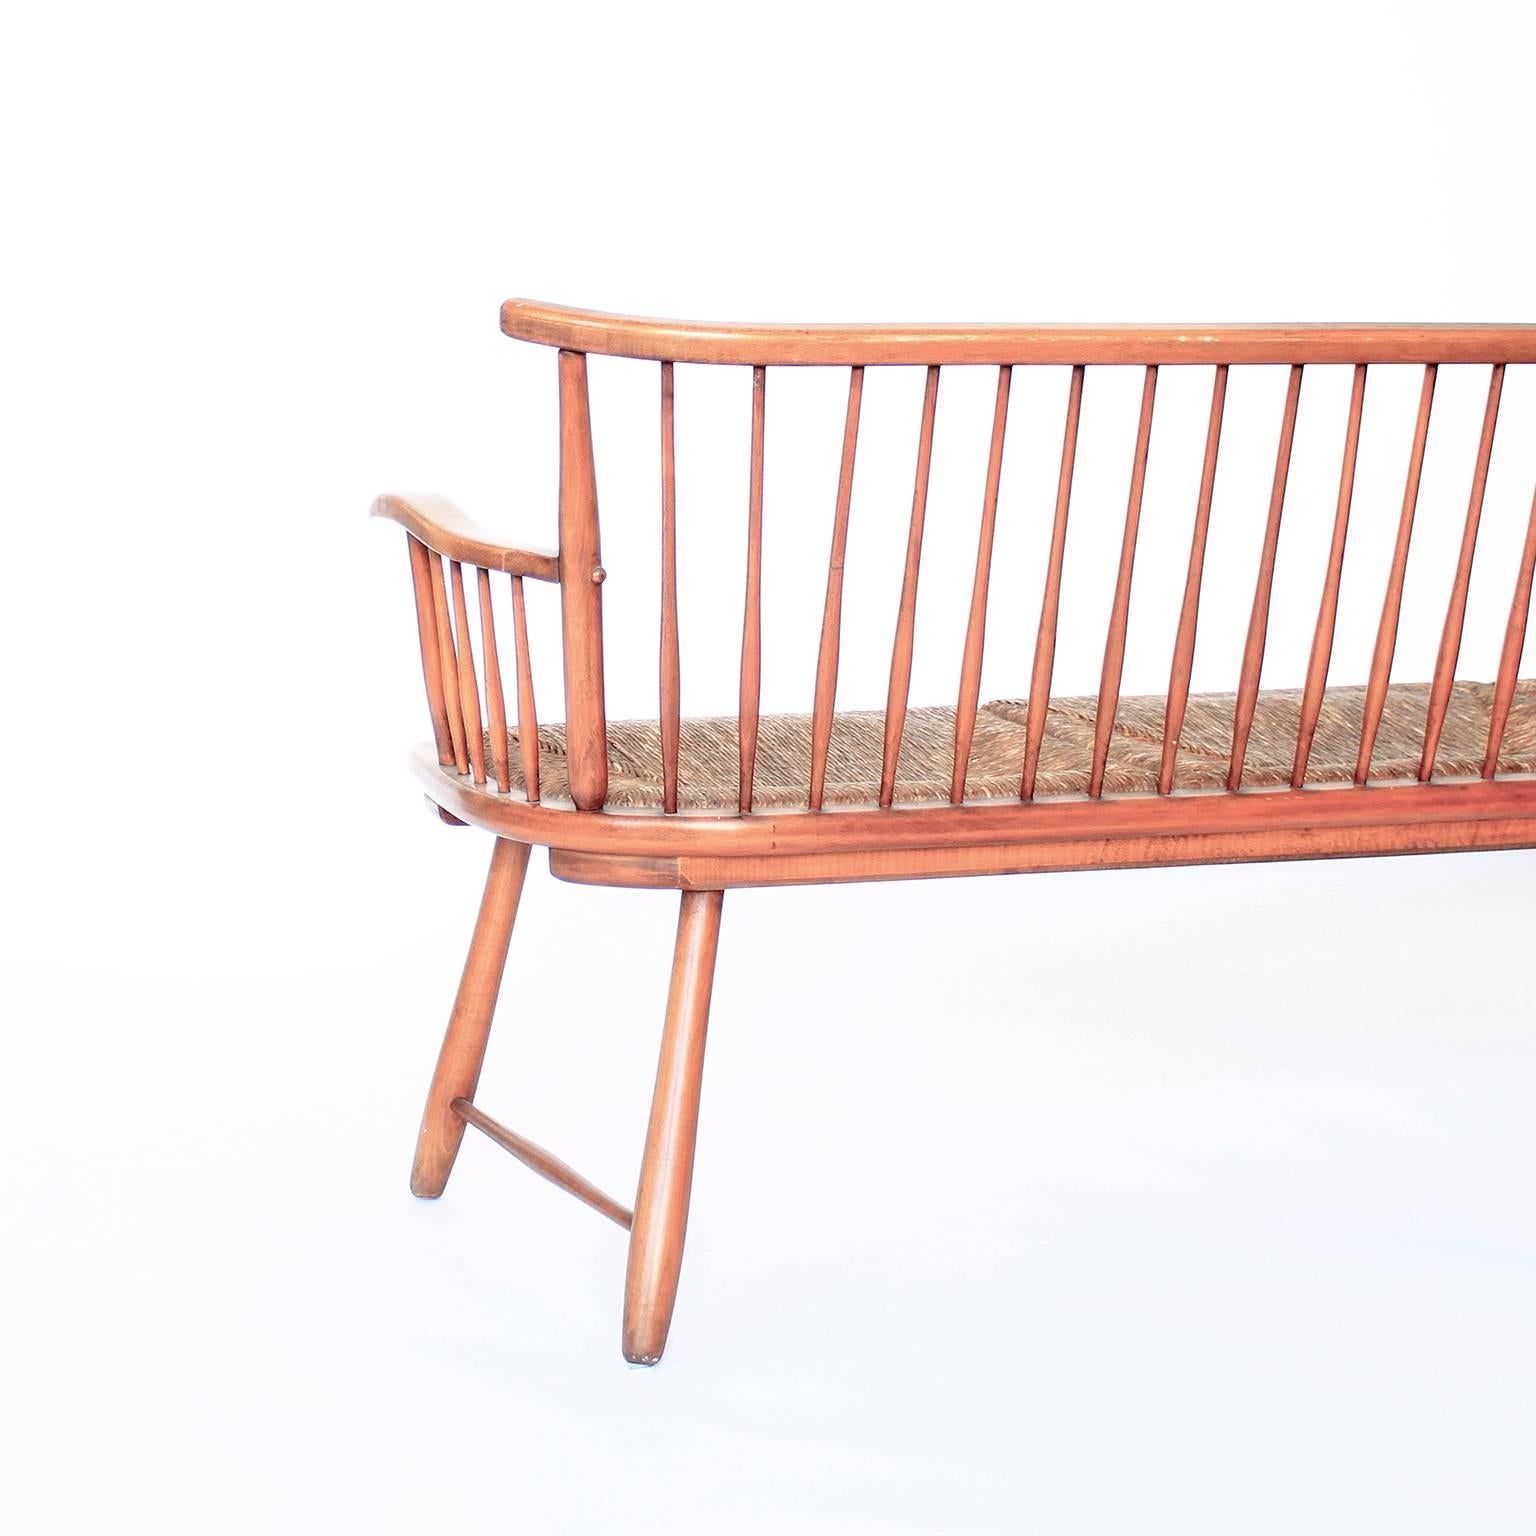 Rare Shaker-style bench from Germany with charming rush mat seating. Designed by Arno Lambrecht. Manufactured in Germany by WK-Sozialwerk. We use as an entry hall bench or in a dining setting. Lambrechts pieces are simple, pure and display a